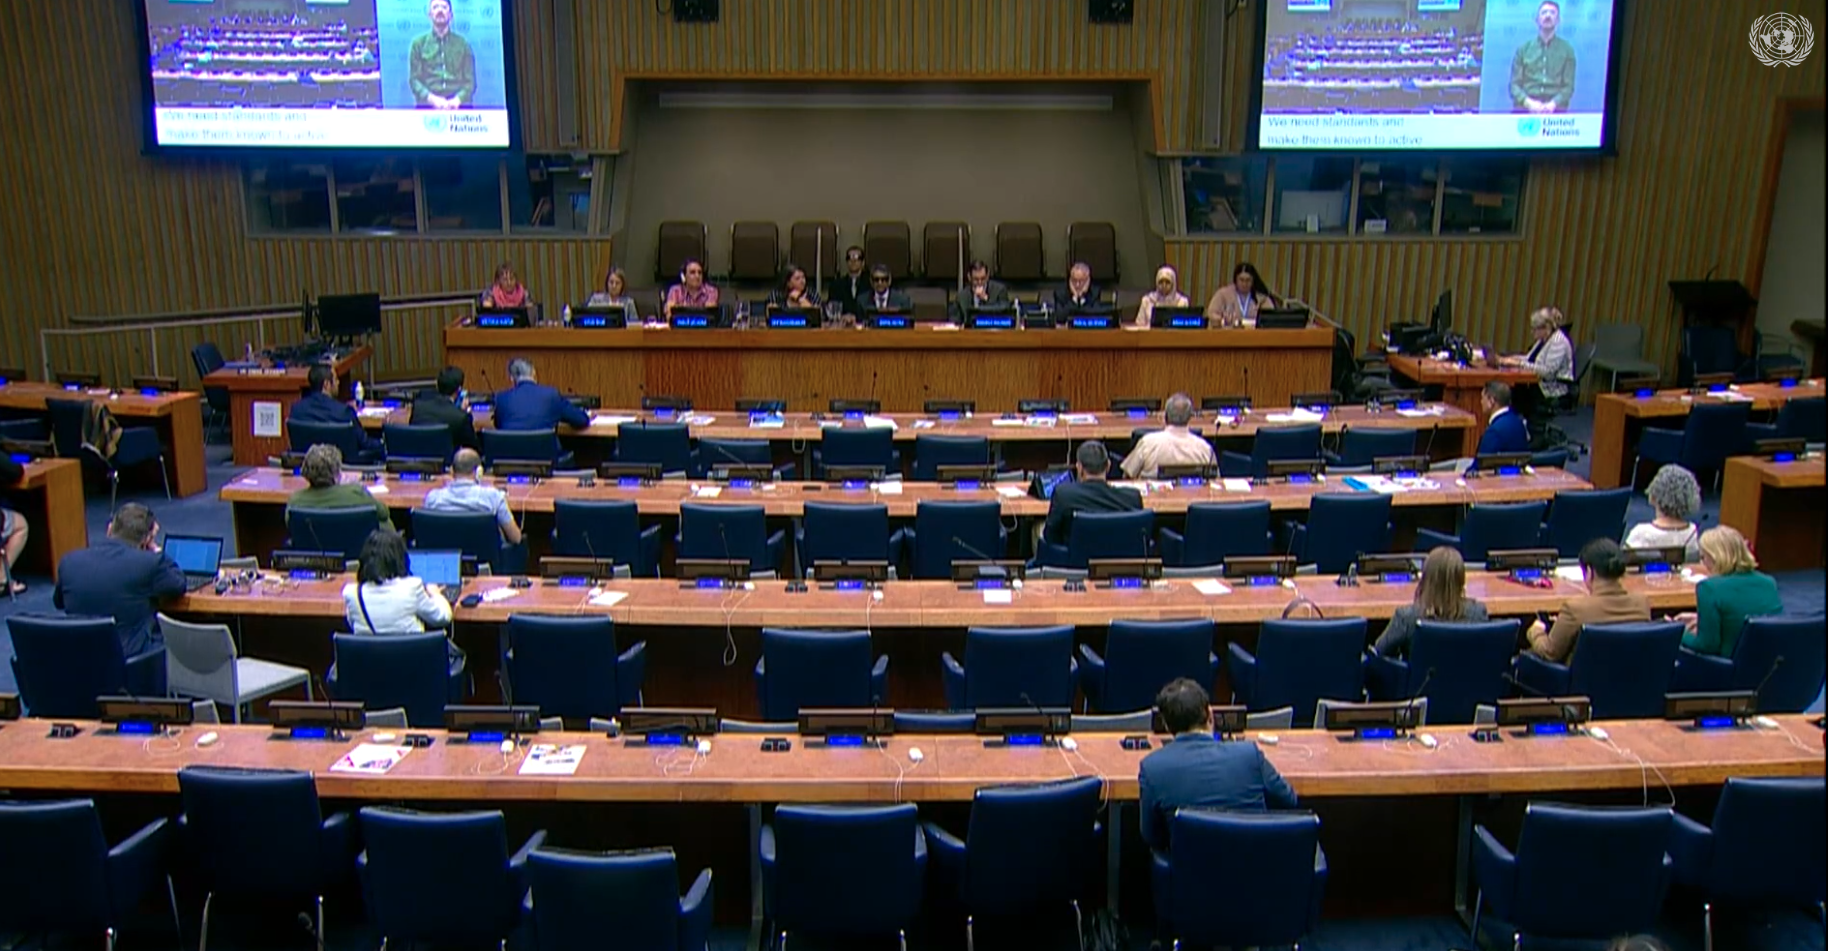 An Image of the Digital Assitive Technology challenges and opportunities session at COSP Cover Image